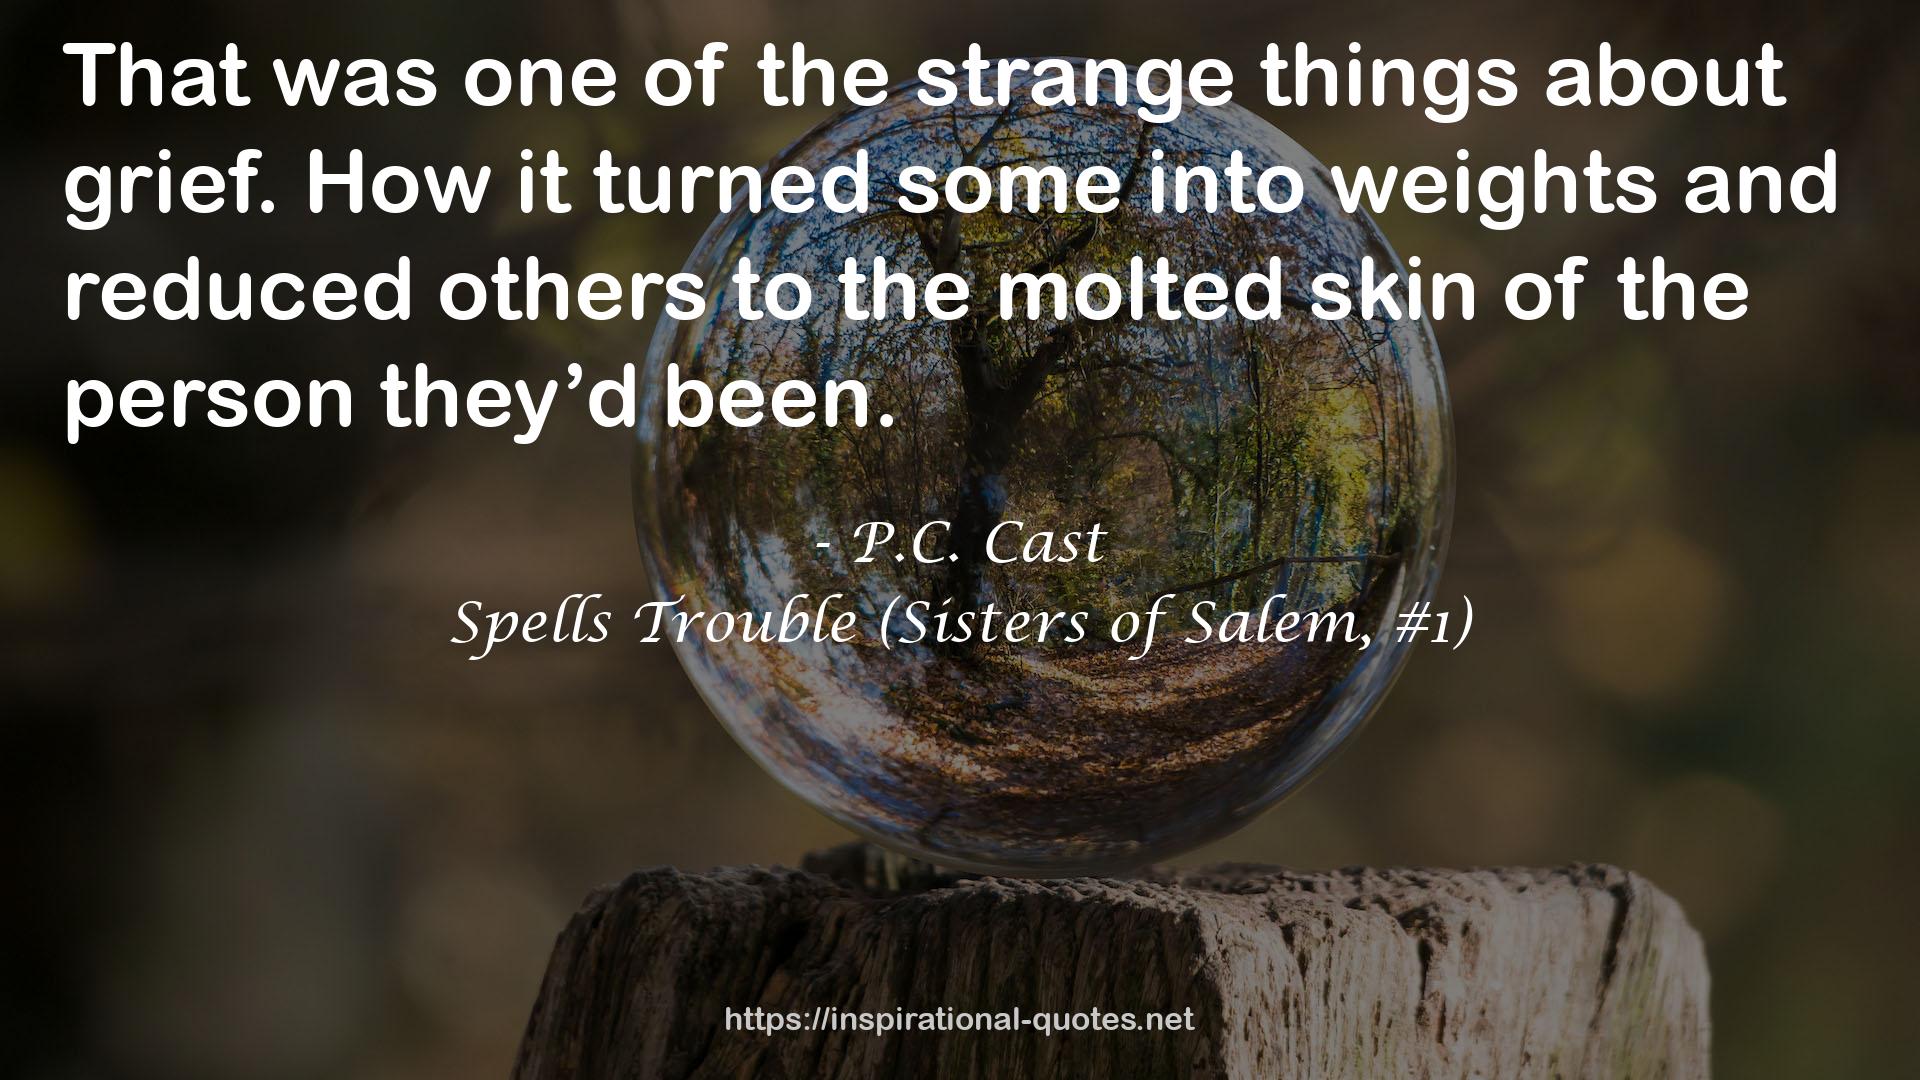 Spells Trouble (Sisters of Salem, #1) QUOTES